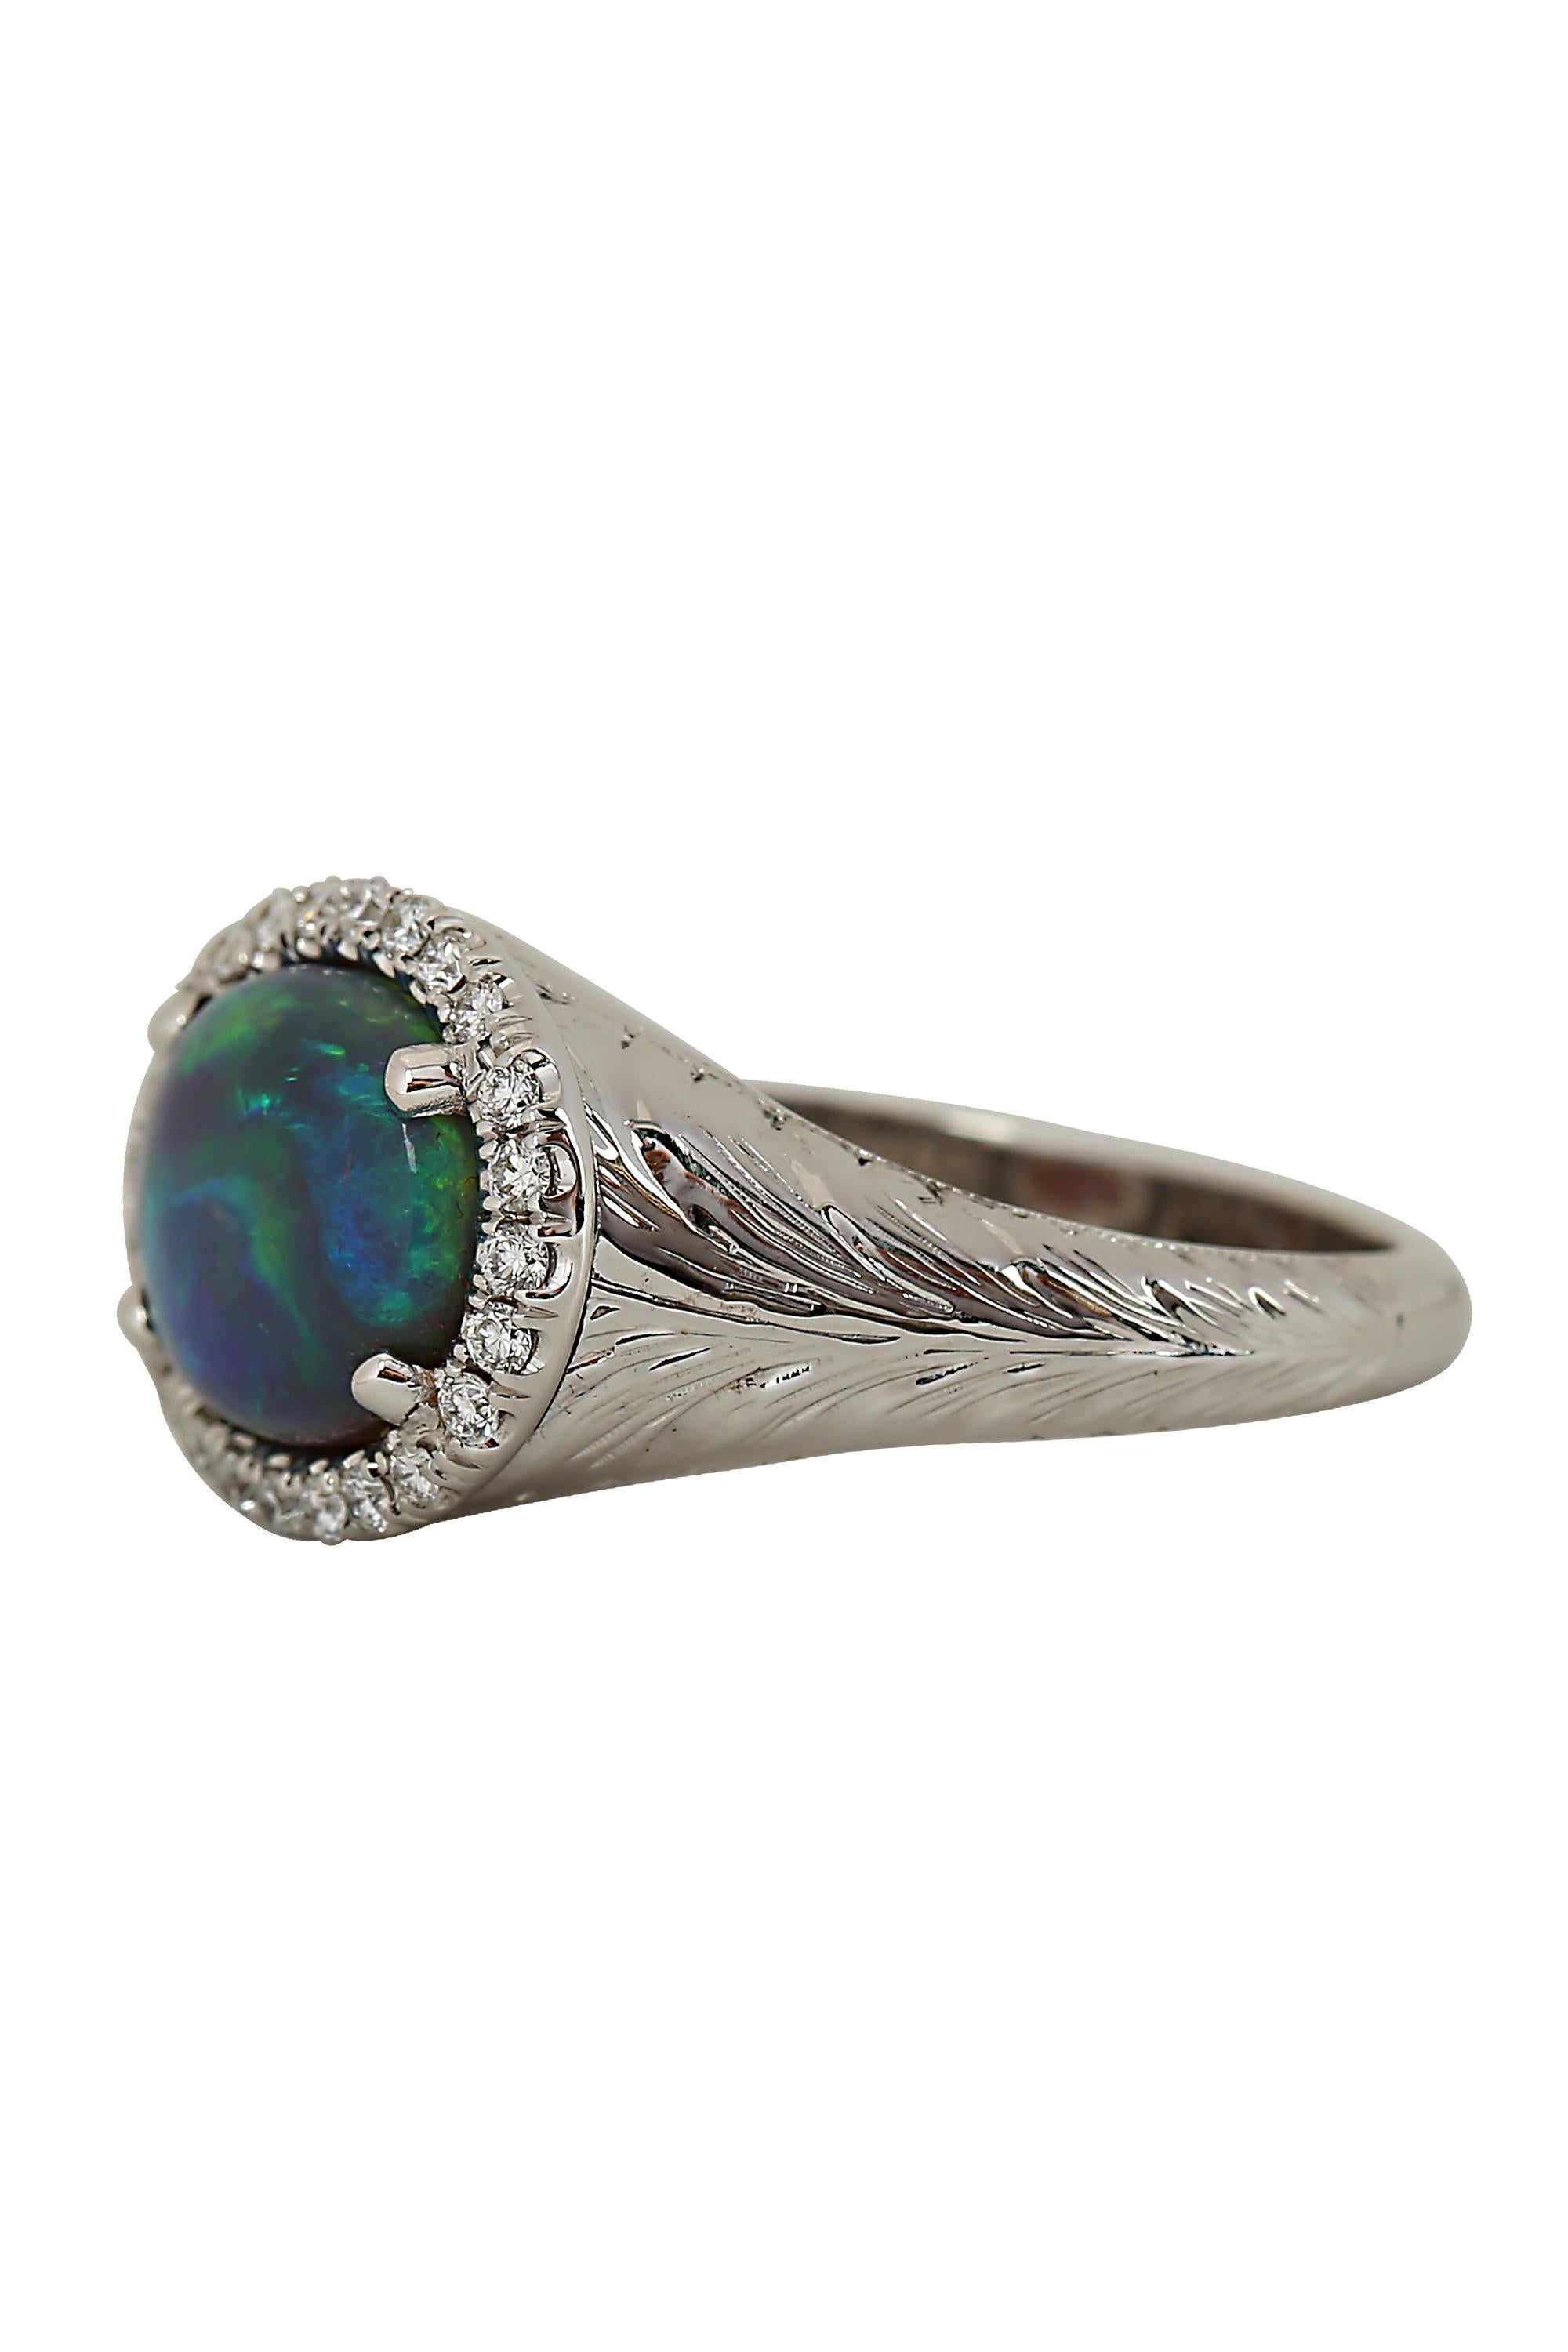 An opal and diamond ring featuring a 3.65 carat black opal displaying a beautiful tapestry of luminous green and blue hues emanating from a halo of bright white round brilliant diamonds. Completed by a finely crafted and subtly designed 18 karat